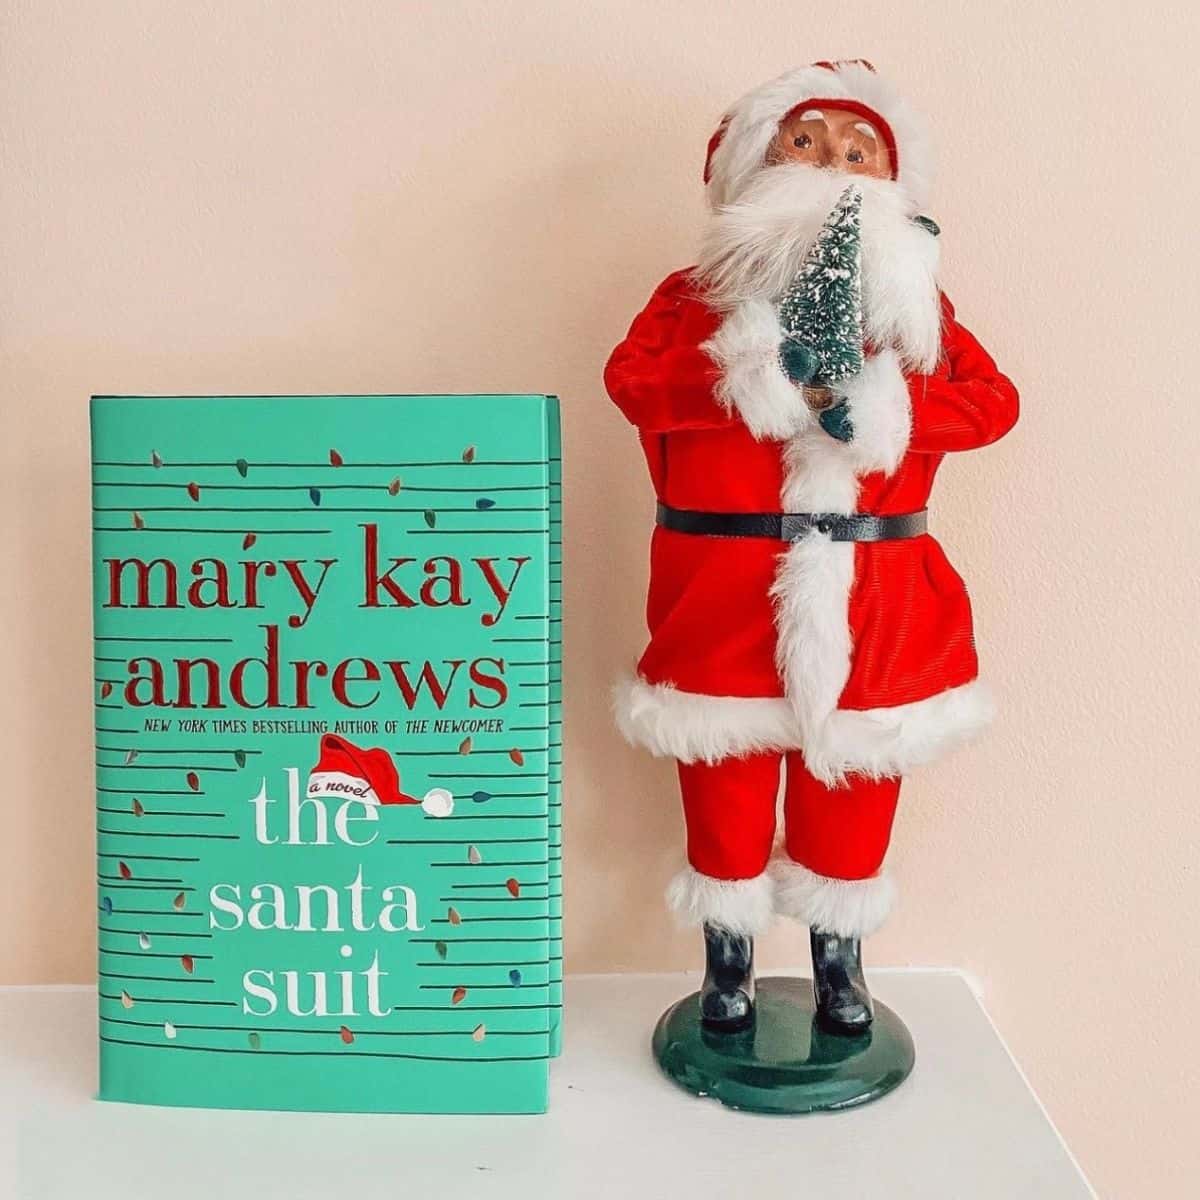 the santa suit by mary kay andrews with a santa doll.